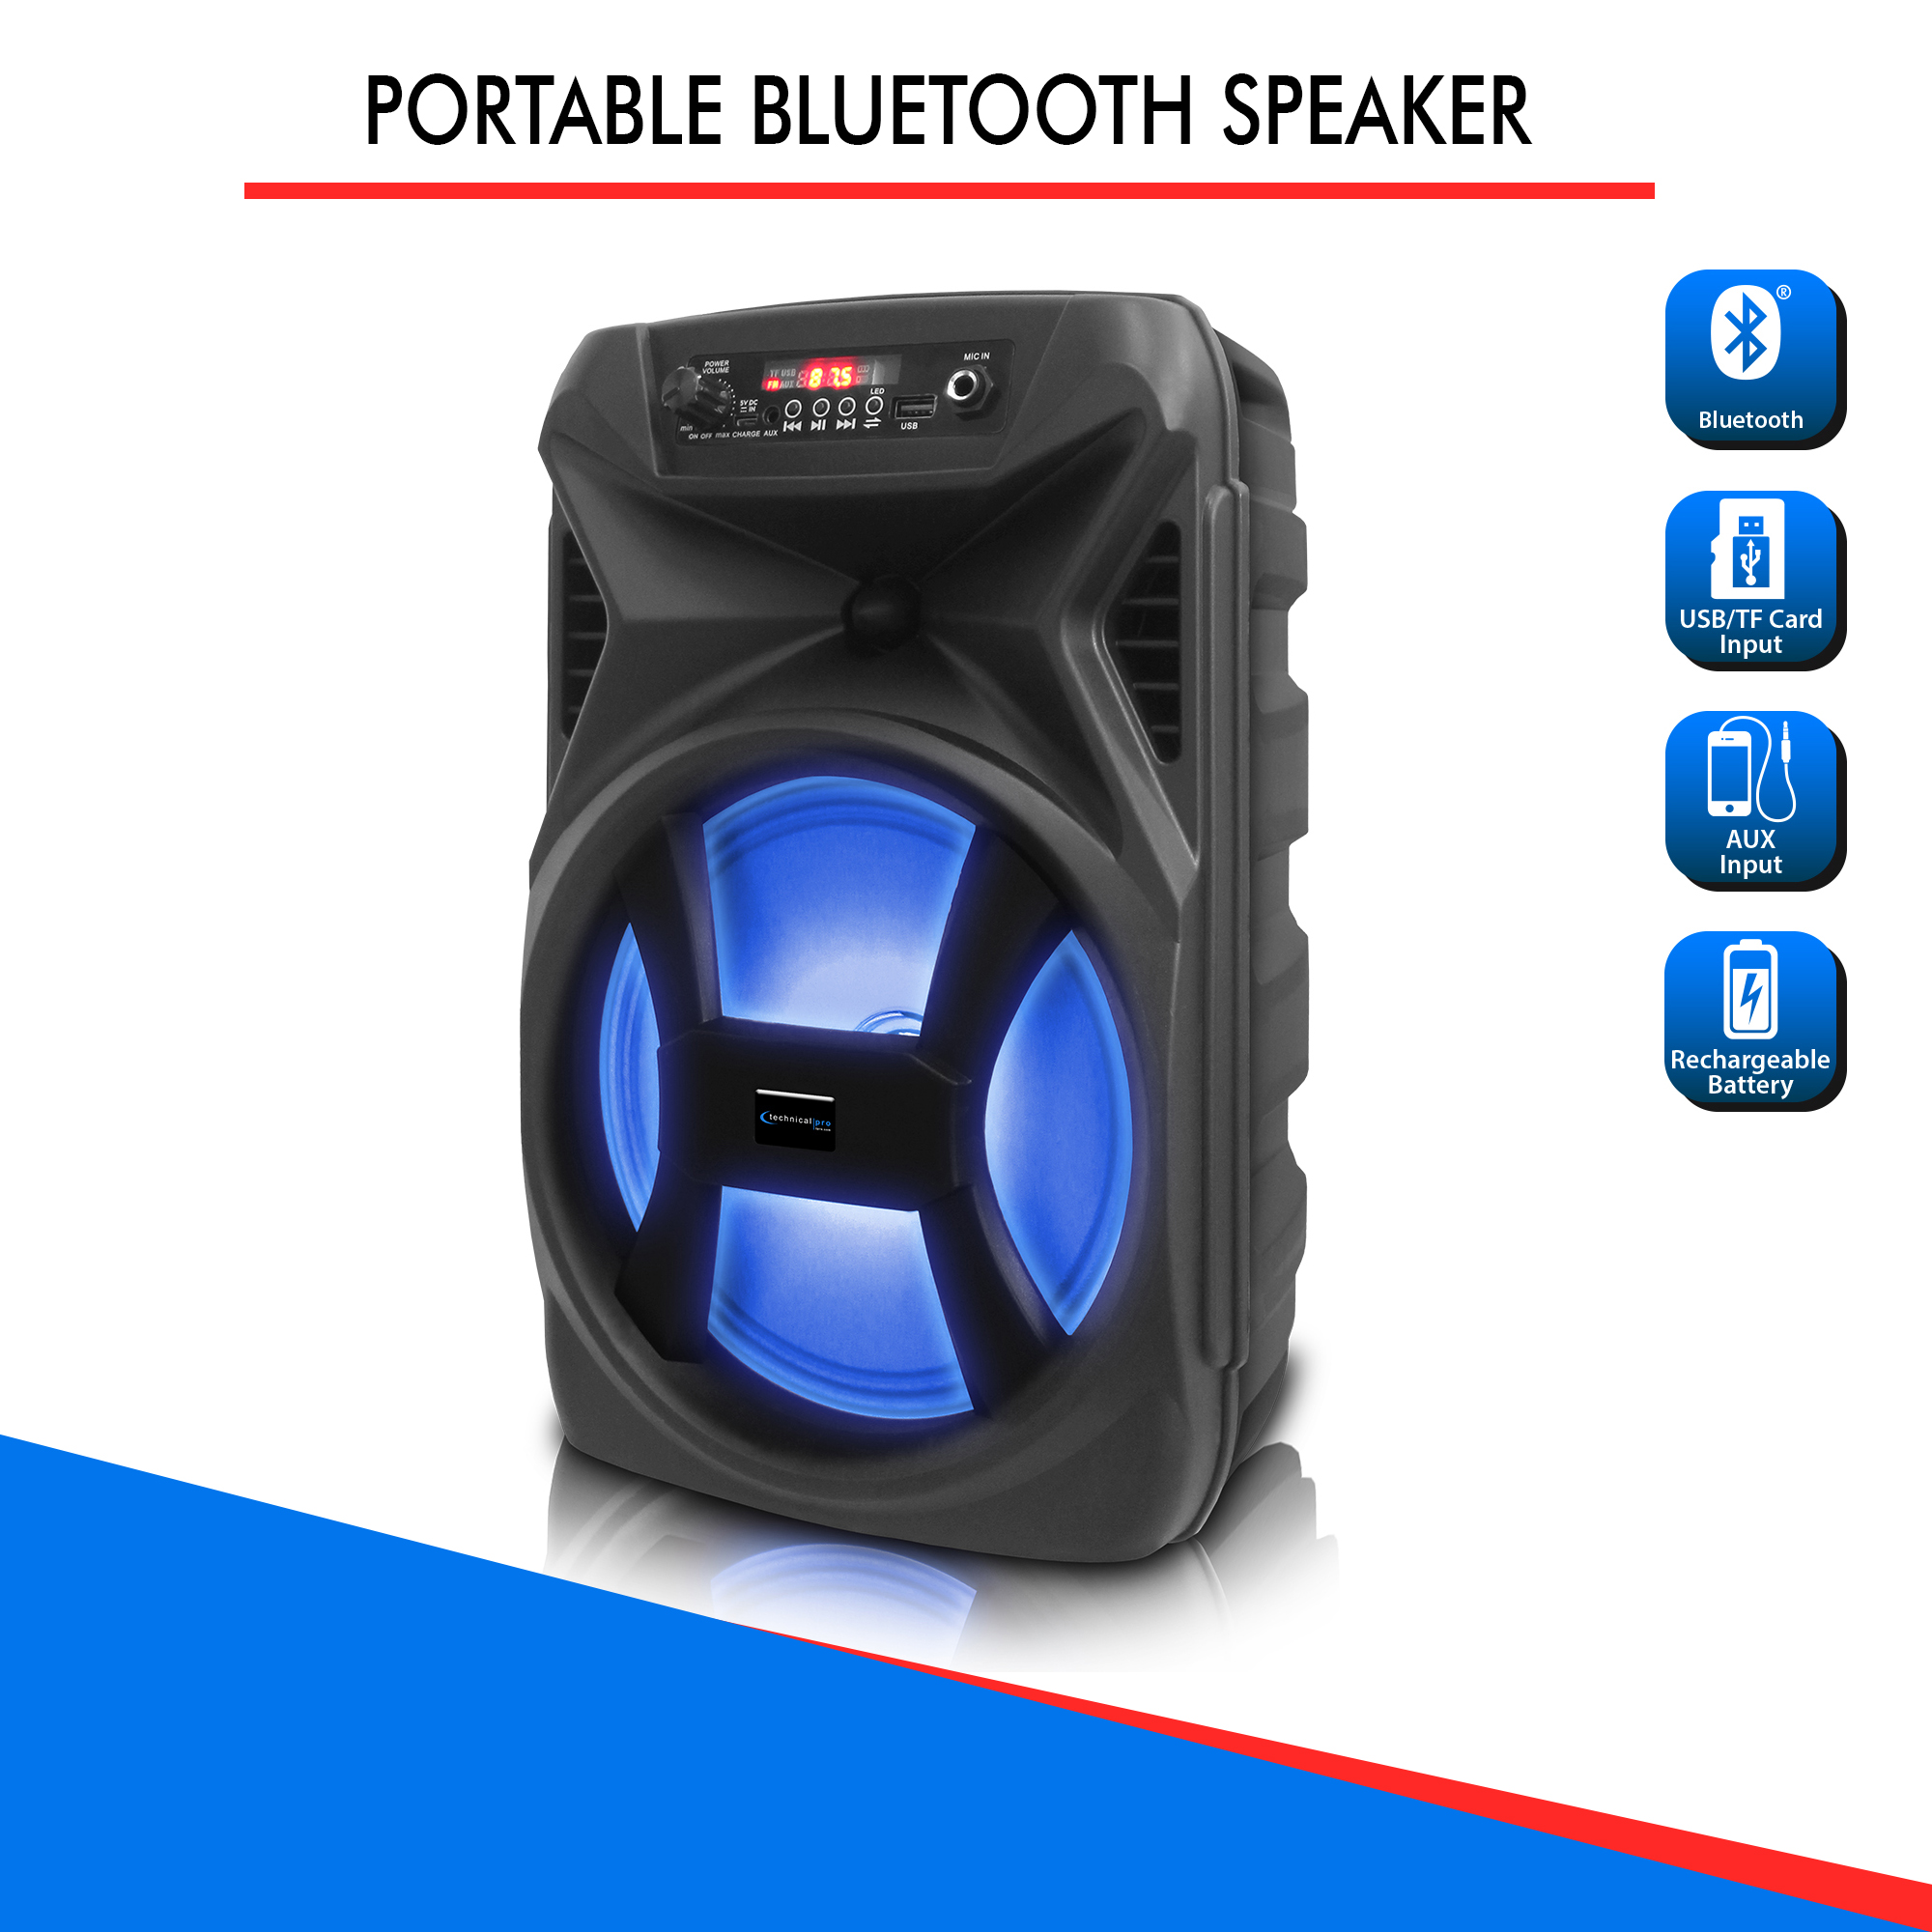 Technical Pro 8" Portable 500 Watts Bluetooth Speaker w/ Woofer and Tweeter, Festival PA LED Speaker, USB Card Input, - image 4 of 7